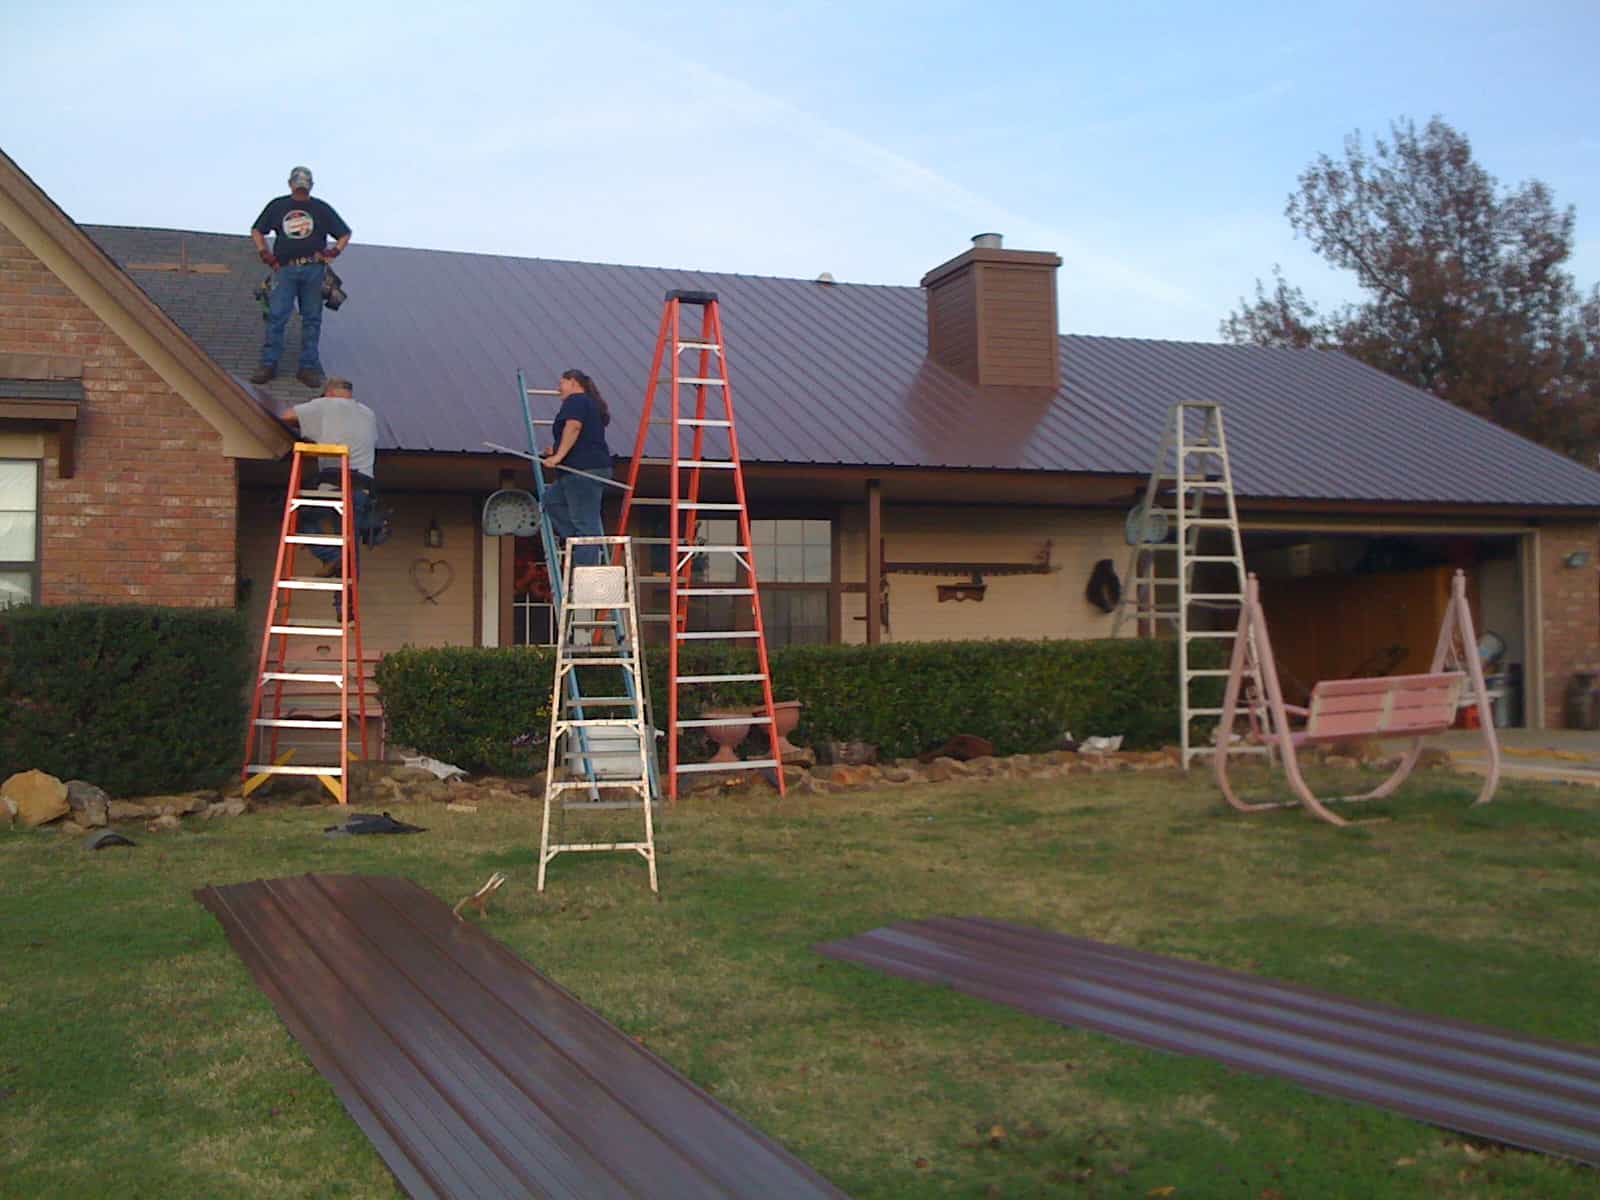 Roofers working on a custom home in Tahlequah, OK.